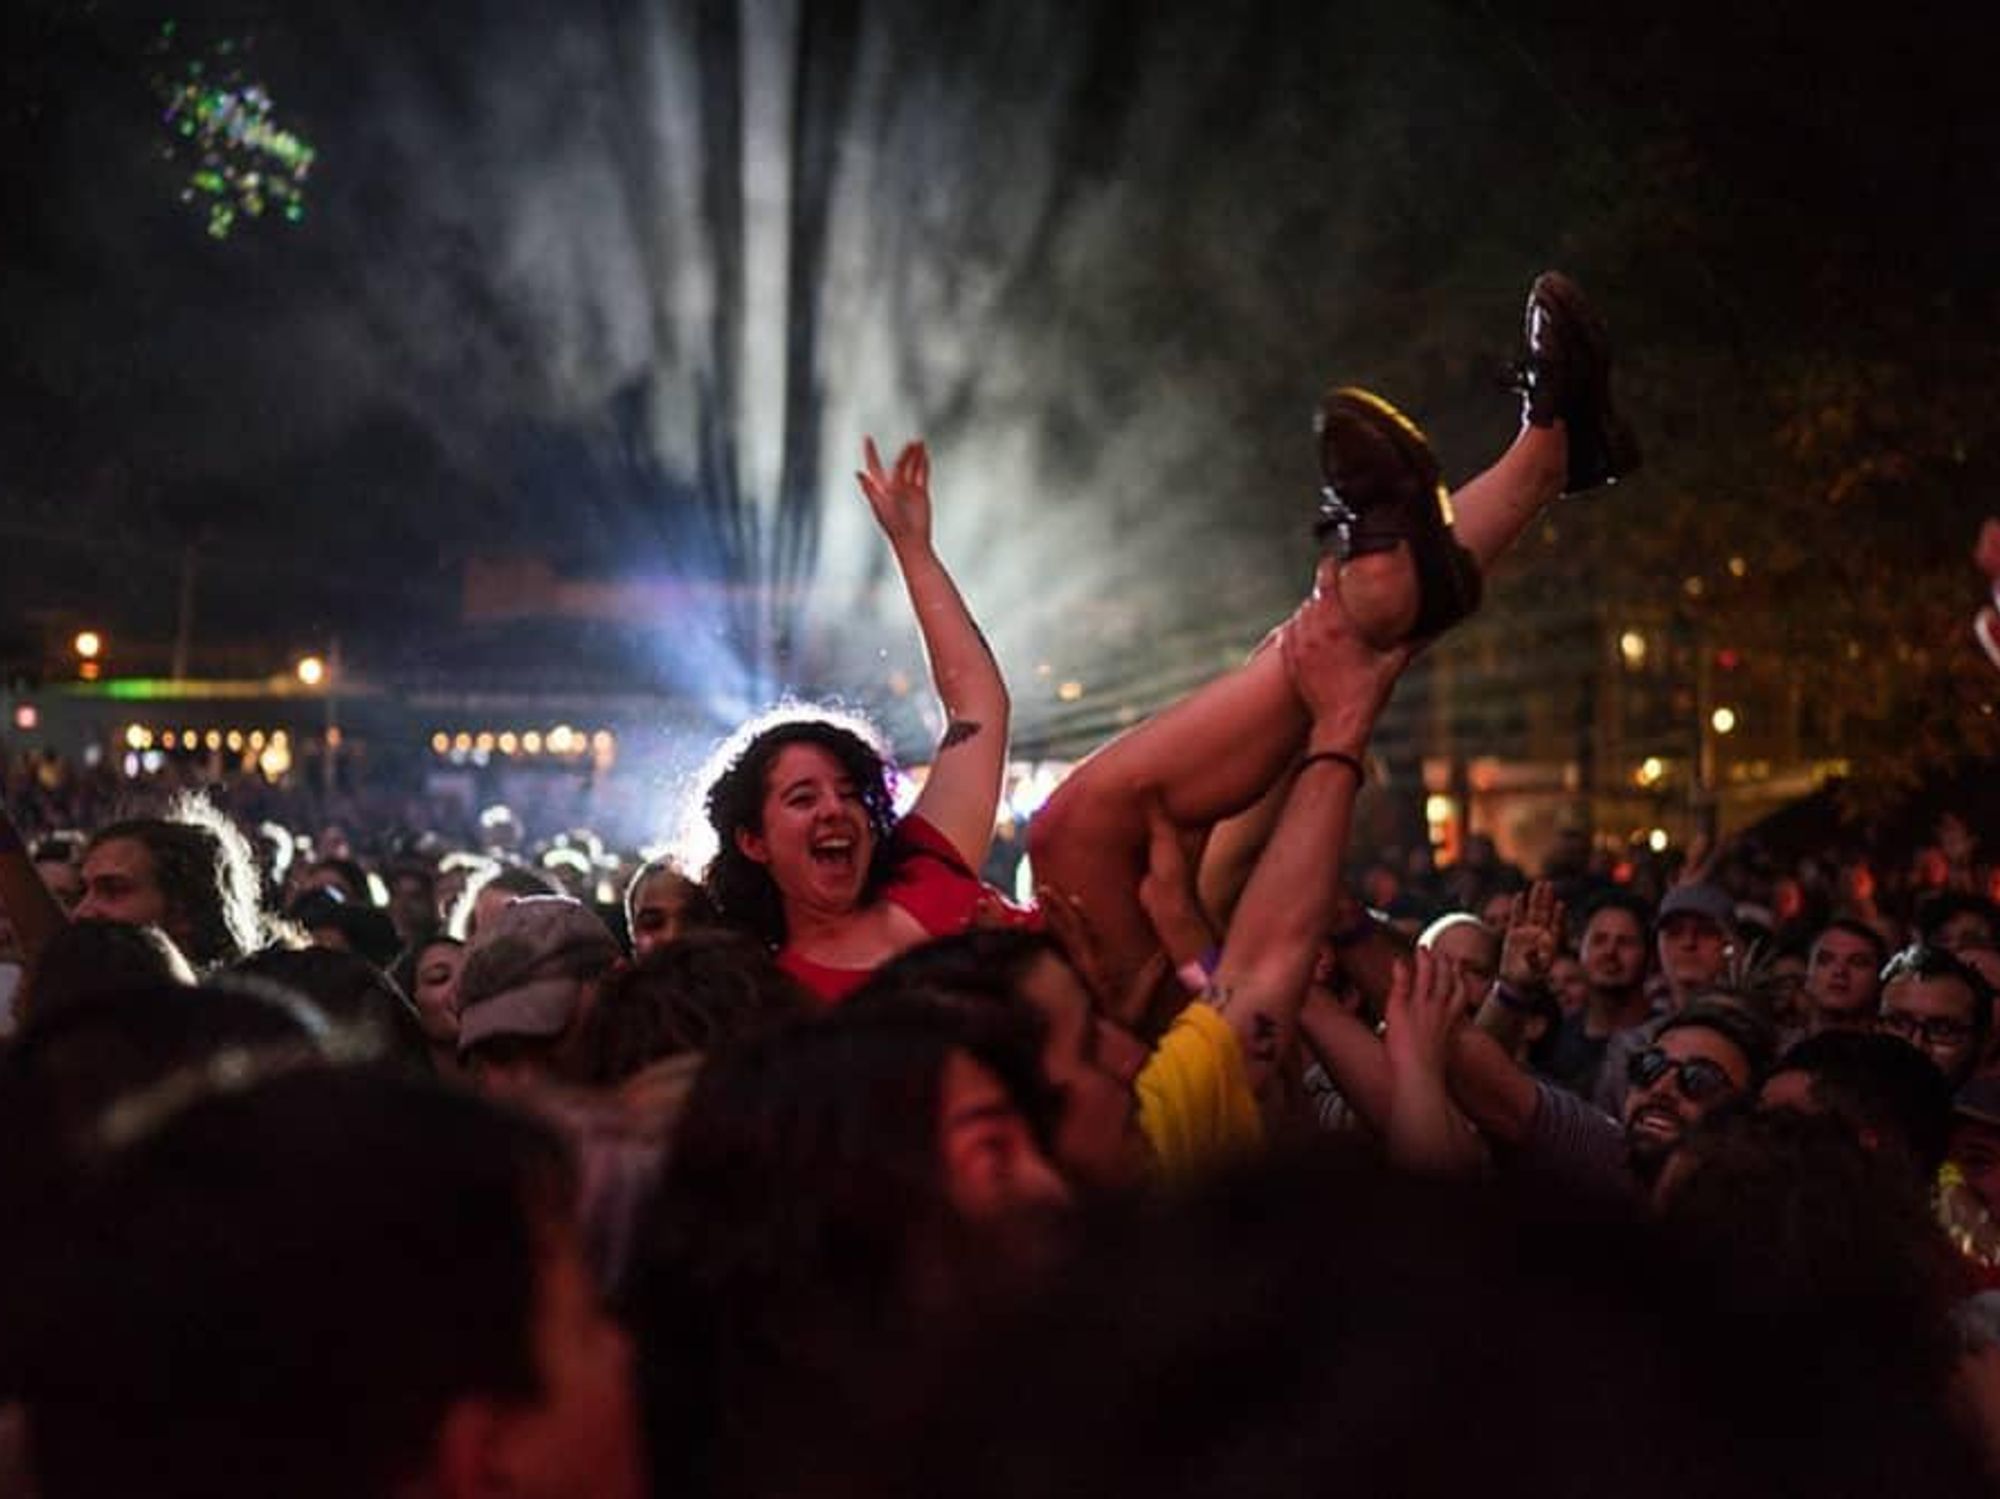 A music fan goes crowd surfing at Levitation.